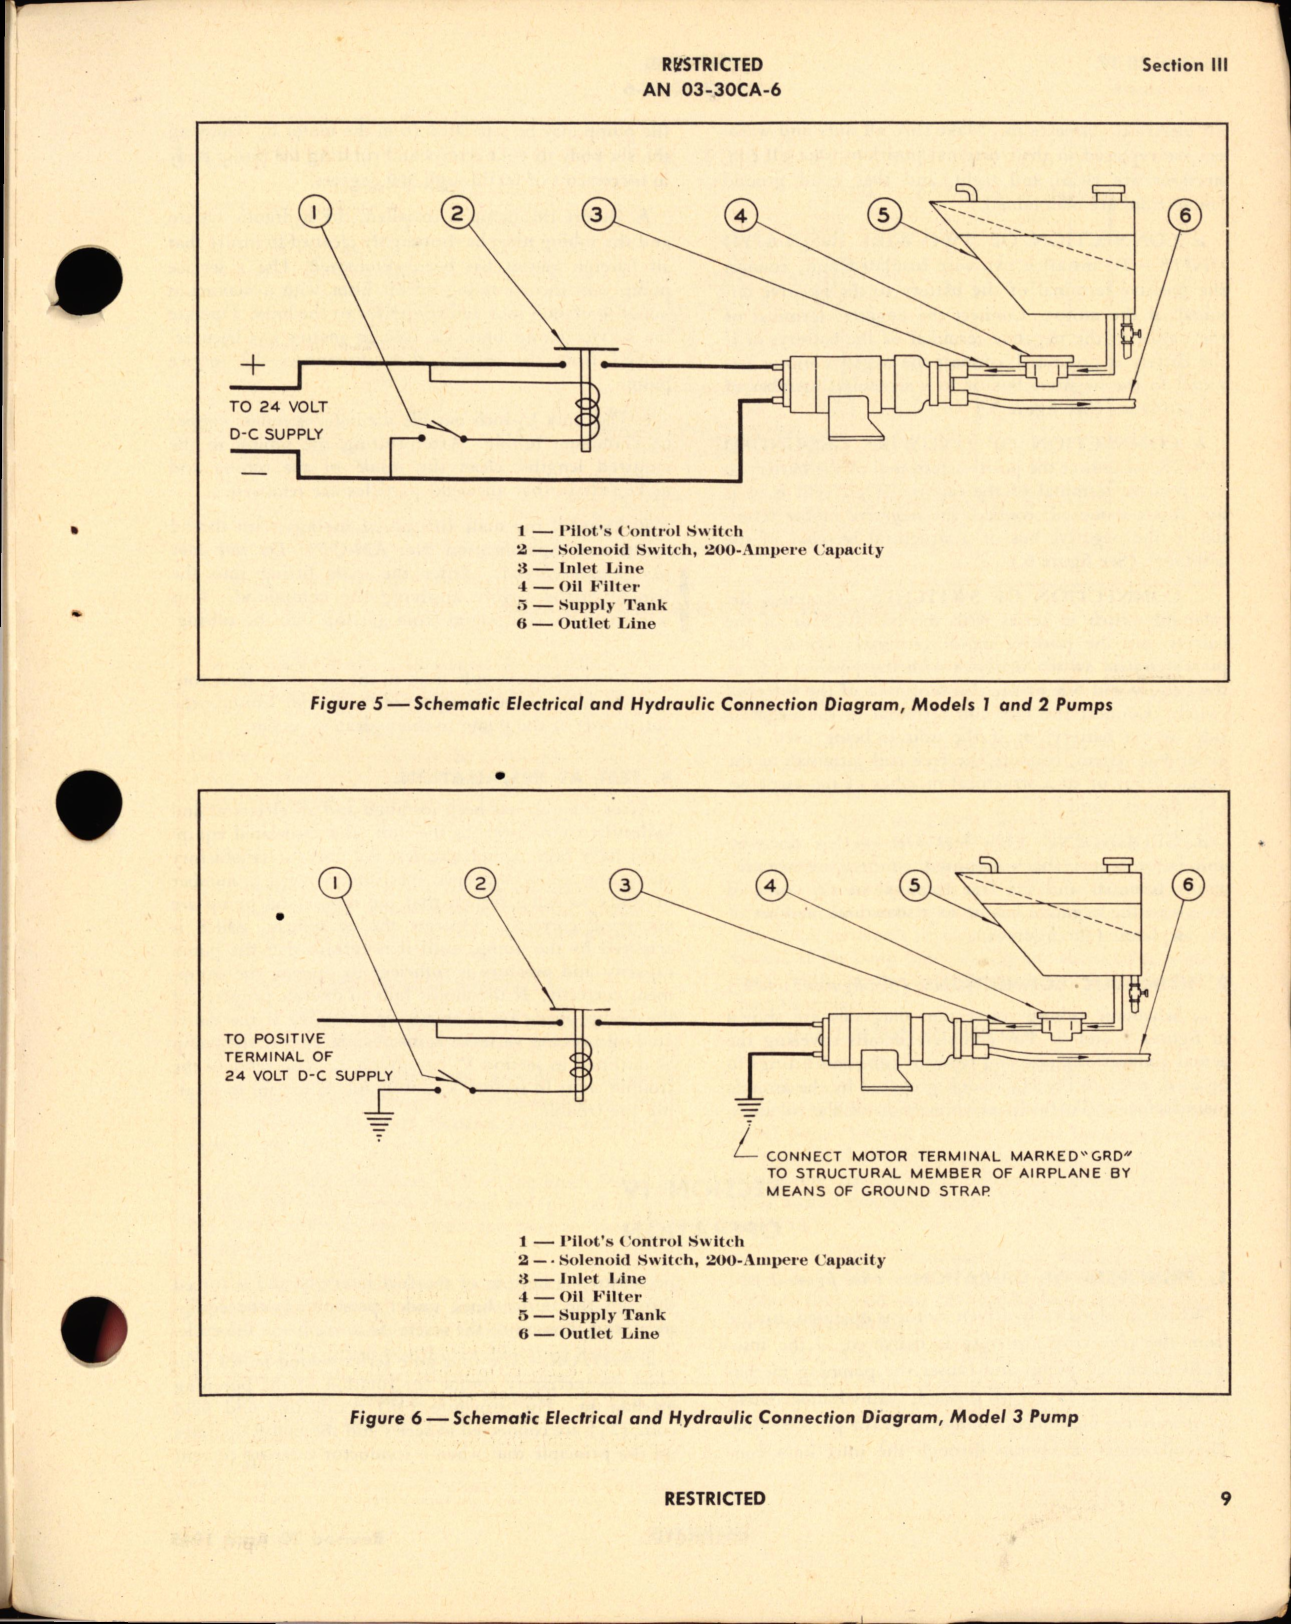 Sample page 5 from AirCorps Library document: Handbook of Instructions with Parts Catalog for Eclipse Type Gerotor Pumps